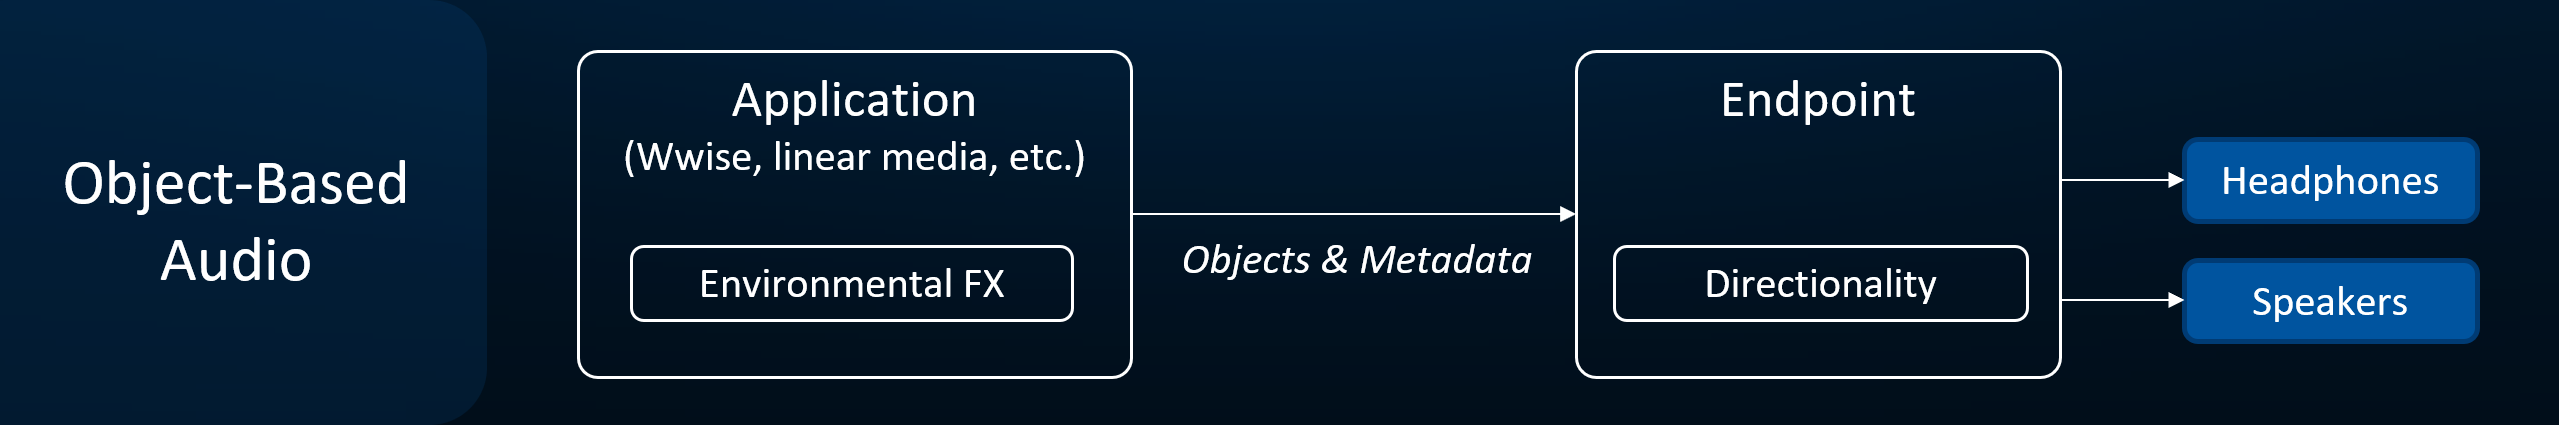 Object-Based and Metadata